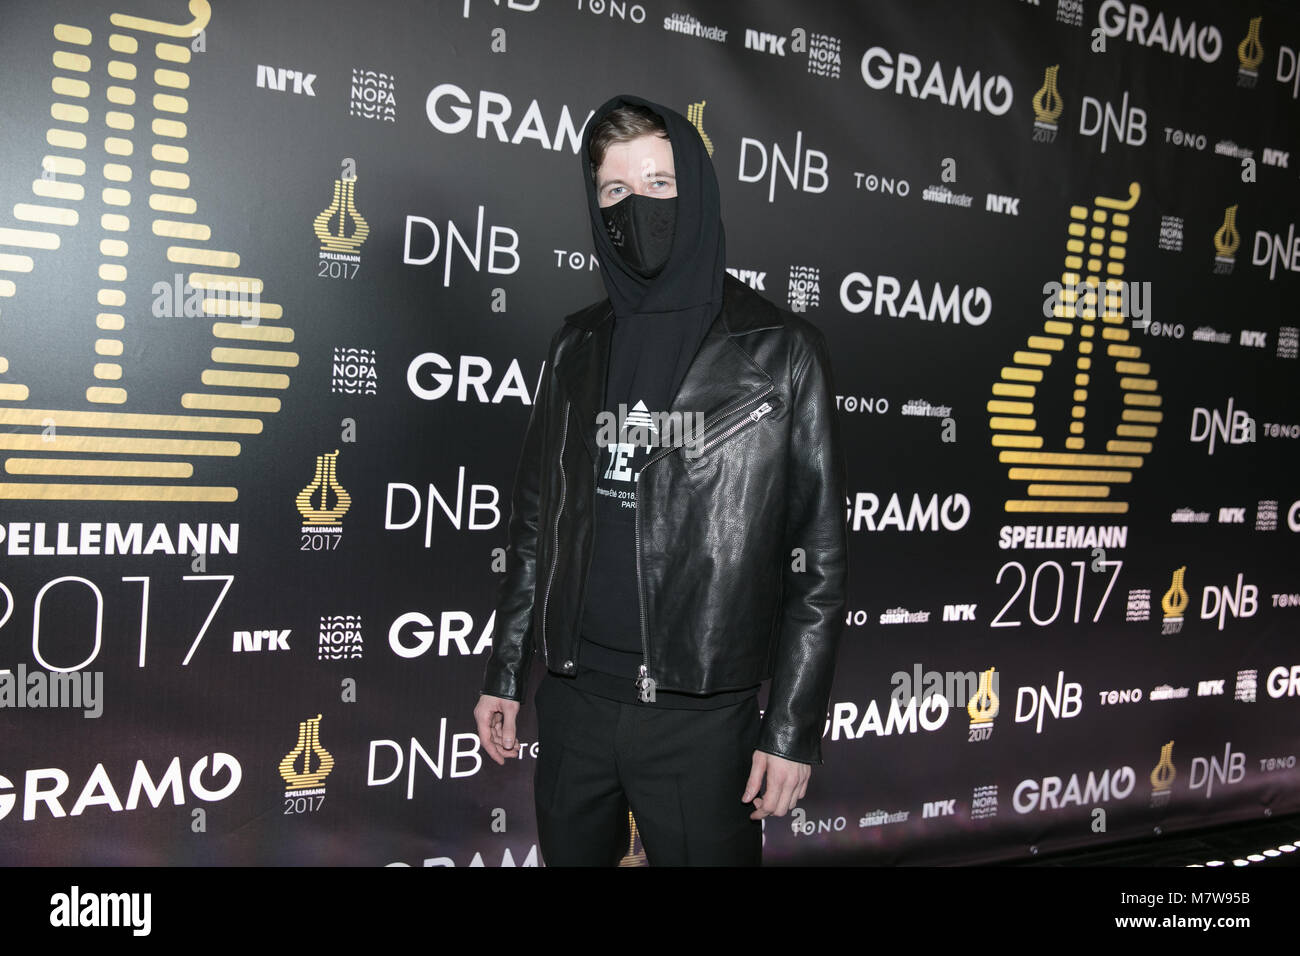 Norway, Oslo - February 25, 2018. The Norwegian record producer Alan Walker  seen at the red carpet